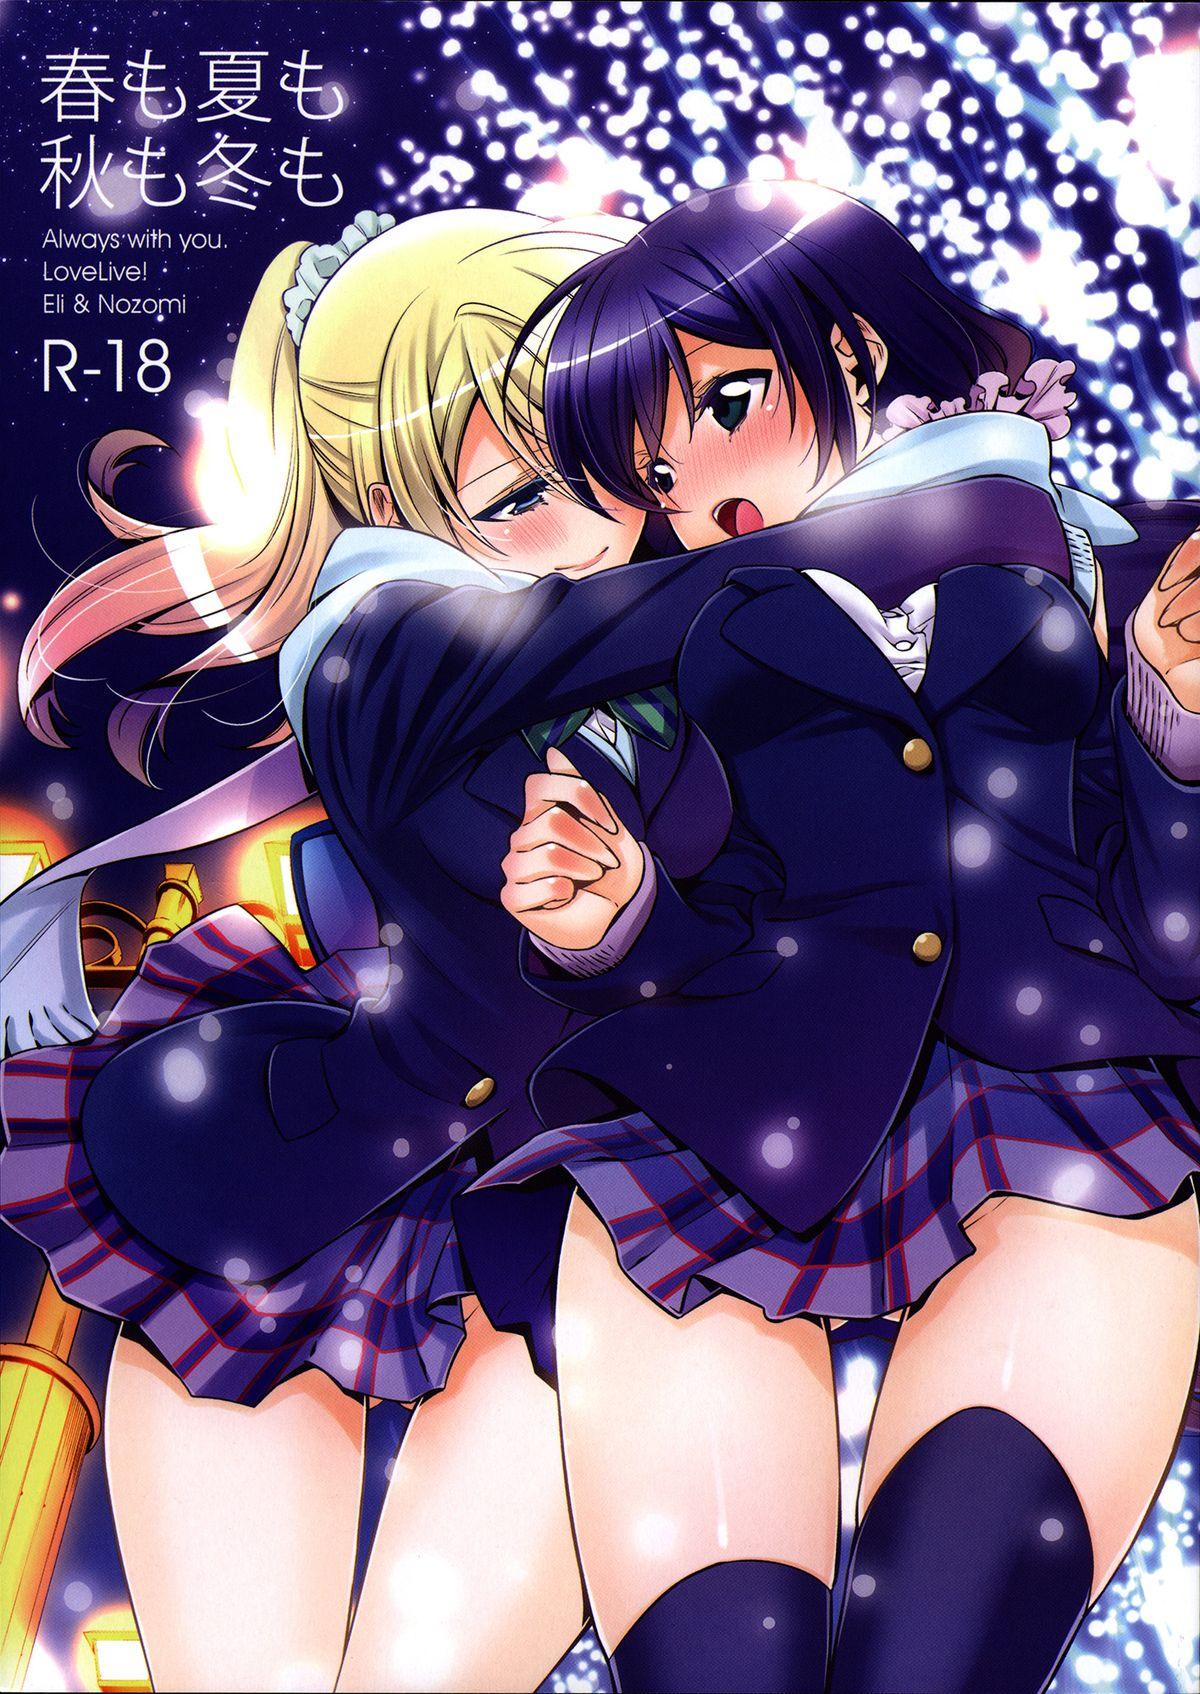 Girls Fucking Haru mo Natsu mo Aki mo Fuyu mo | In Spring, In Summer, In Autumn, In Winter. Always With You! - Love live Small Tits Porn - Page 1